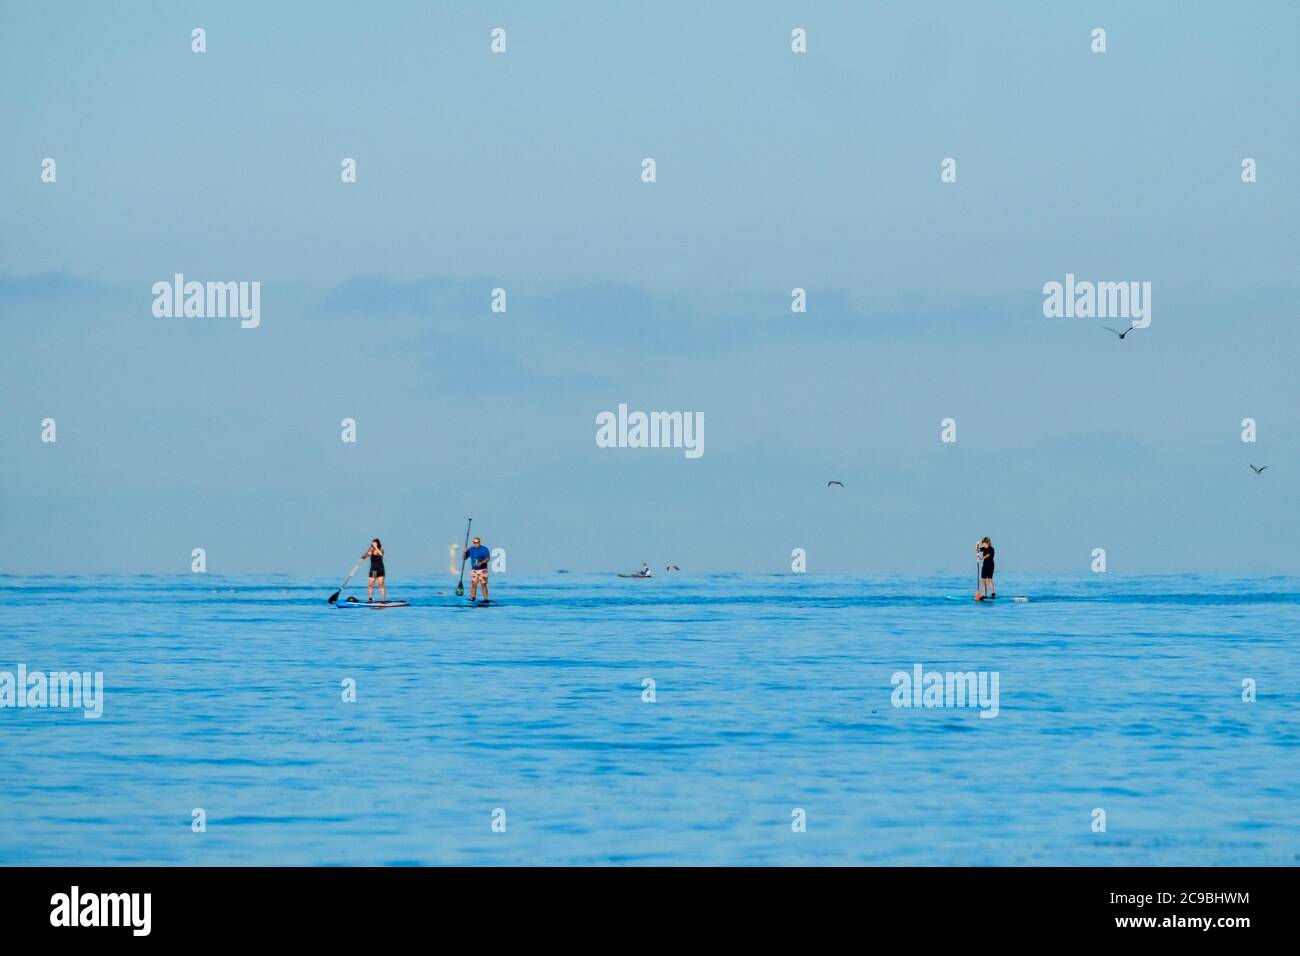 Worthing Beach, Worthing, UK. 30th July, 2020. Paddleboarders enjoy the calm morning sea . With a clear blue sky and flat waters people on paddle boards enjoy the early morning off the sussex coast. Rampion Wind Farm can be seen 13-20km offshore. Picture by Credit: Julie Edwards/Alamy Live News Stock Photo